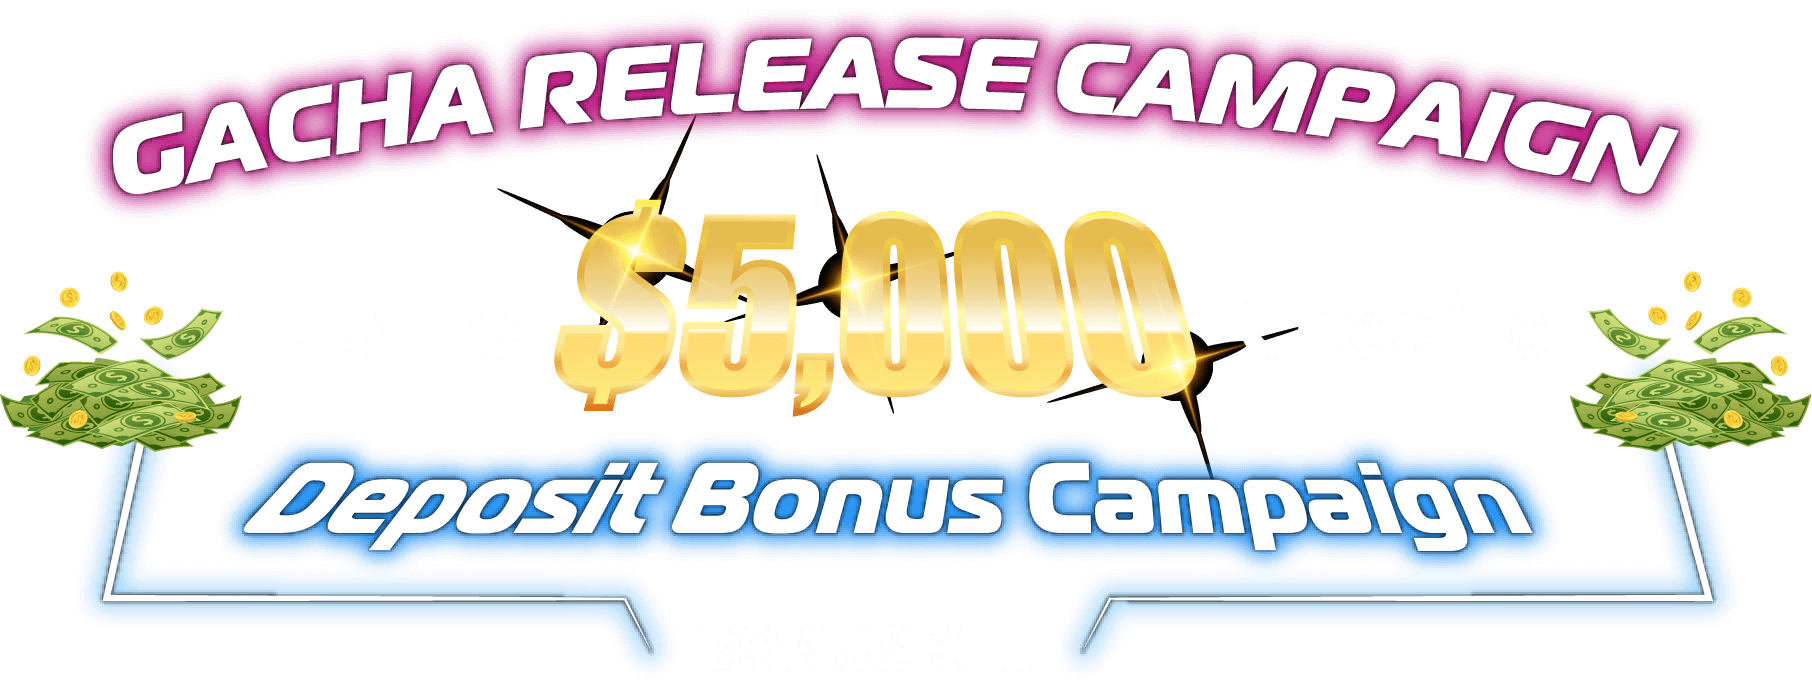 GACHA RELEASE CAMPAIGN up to $5,000 credits